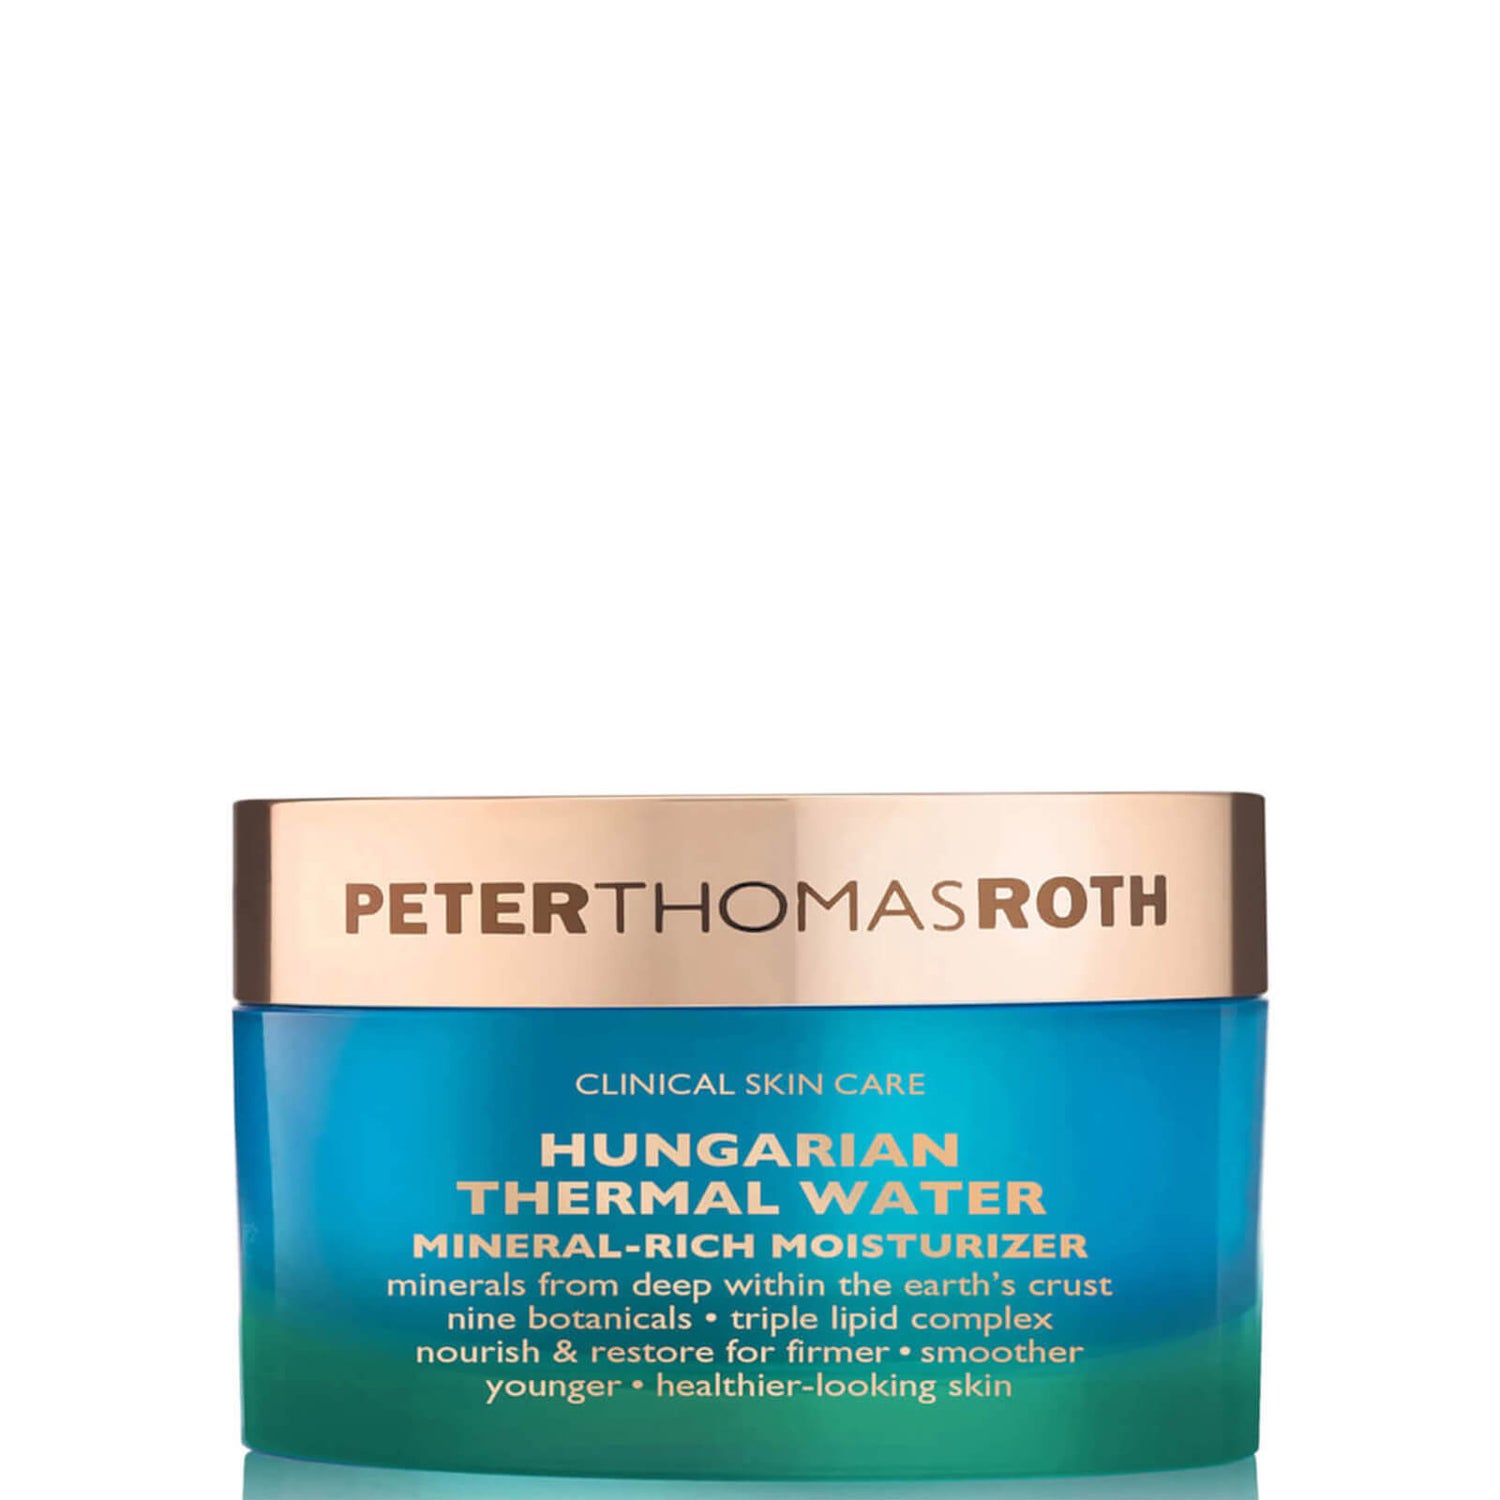 Peter Thomas Roth Hungarian Thermal Water Mineral-Rich Moisturizer (1.7 oz.)